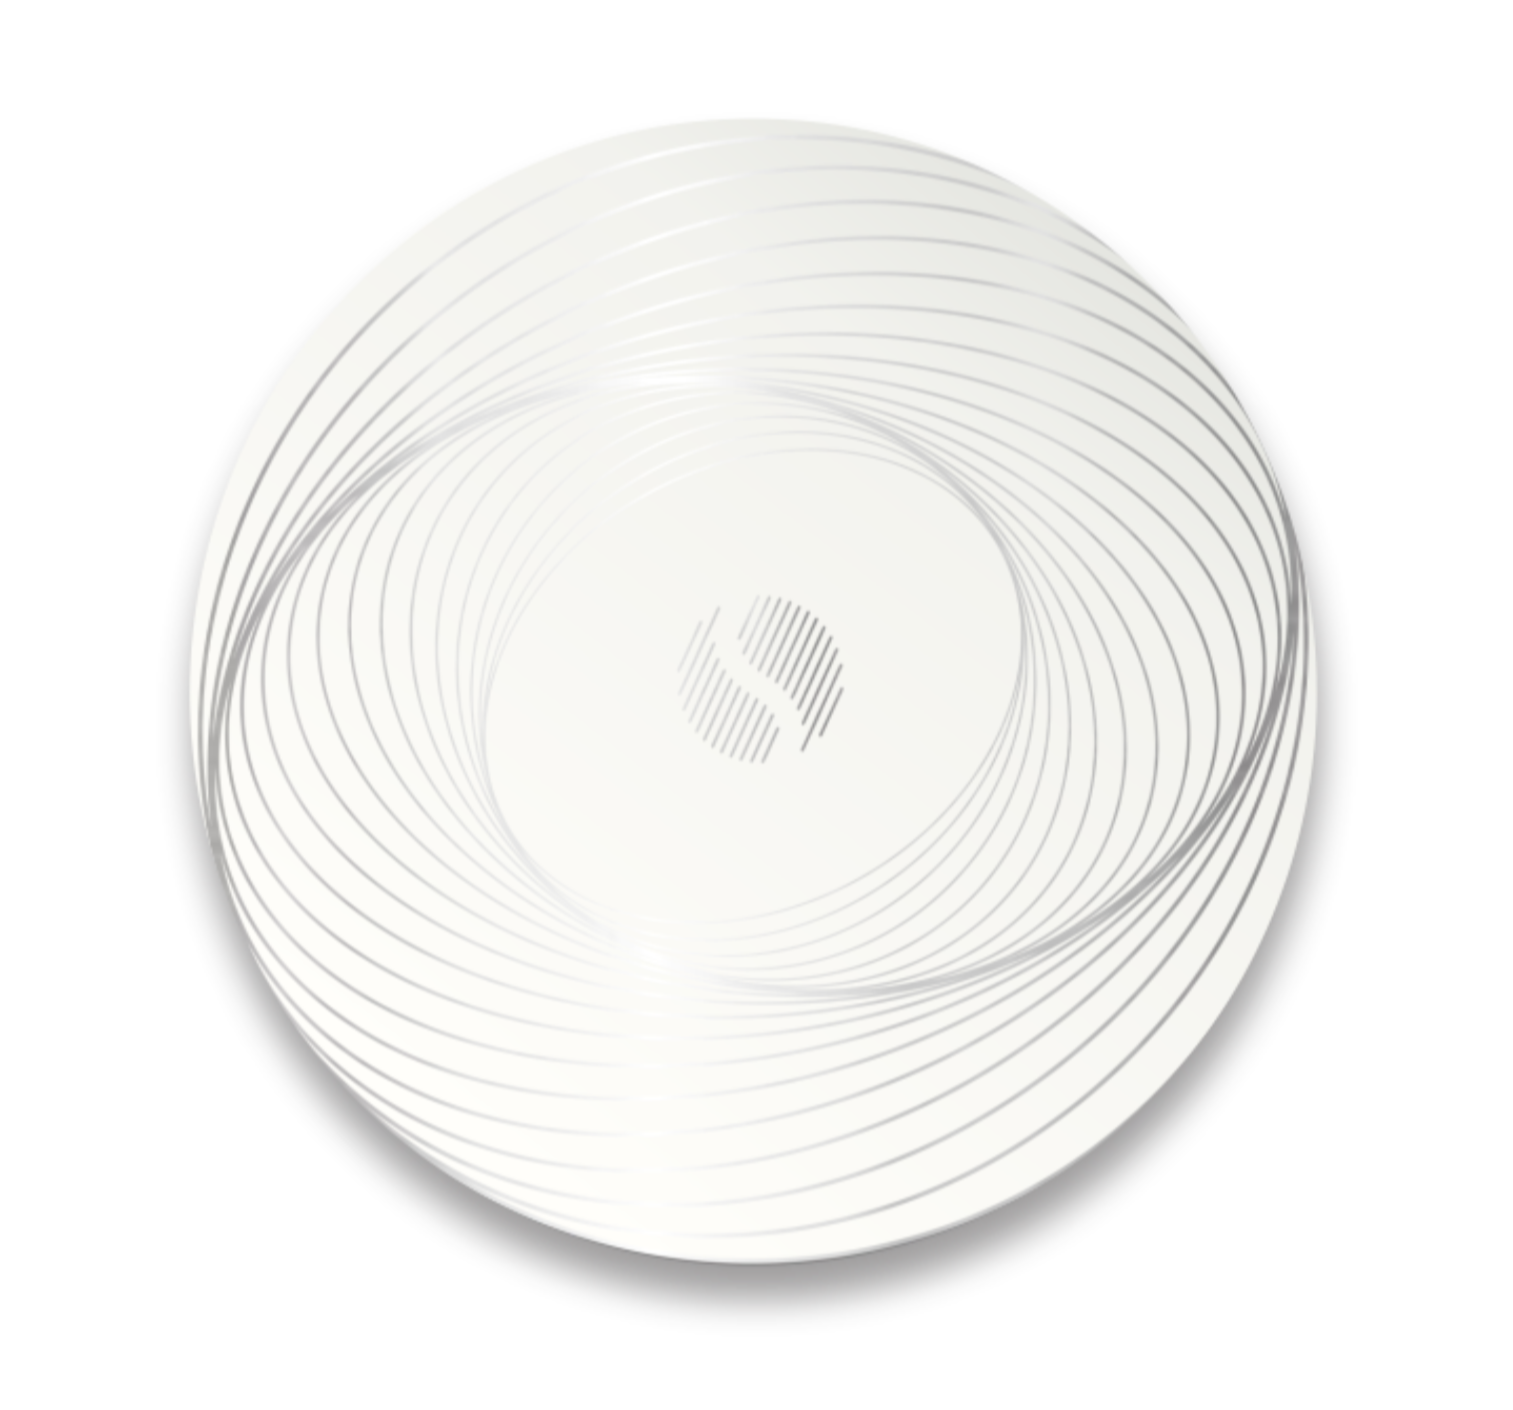 6. SPIRO® DISC PRO – Advanced Electromagnetic Filter for High-EMF Exposure Spaces